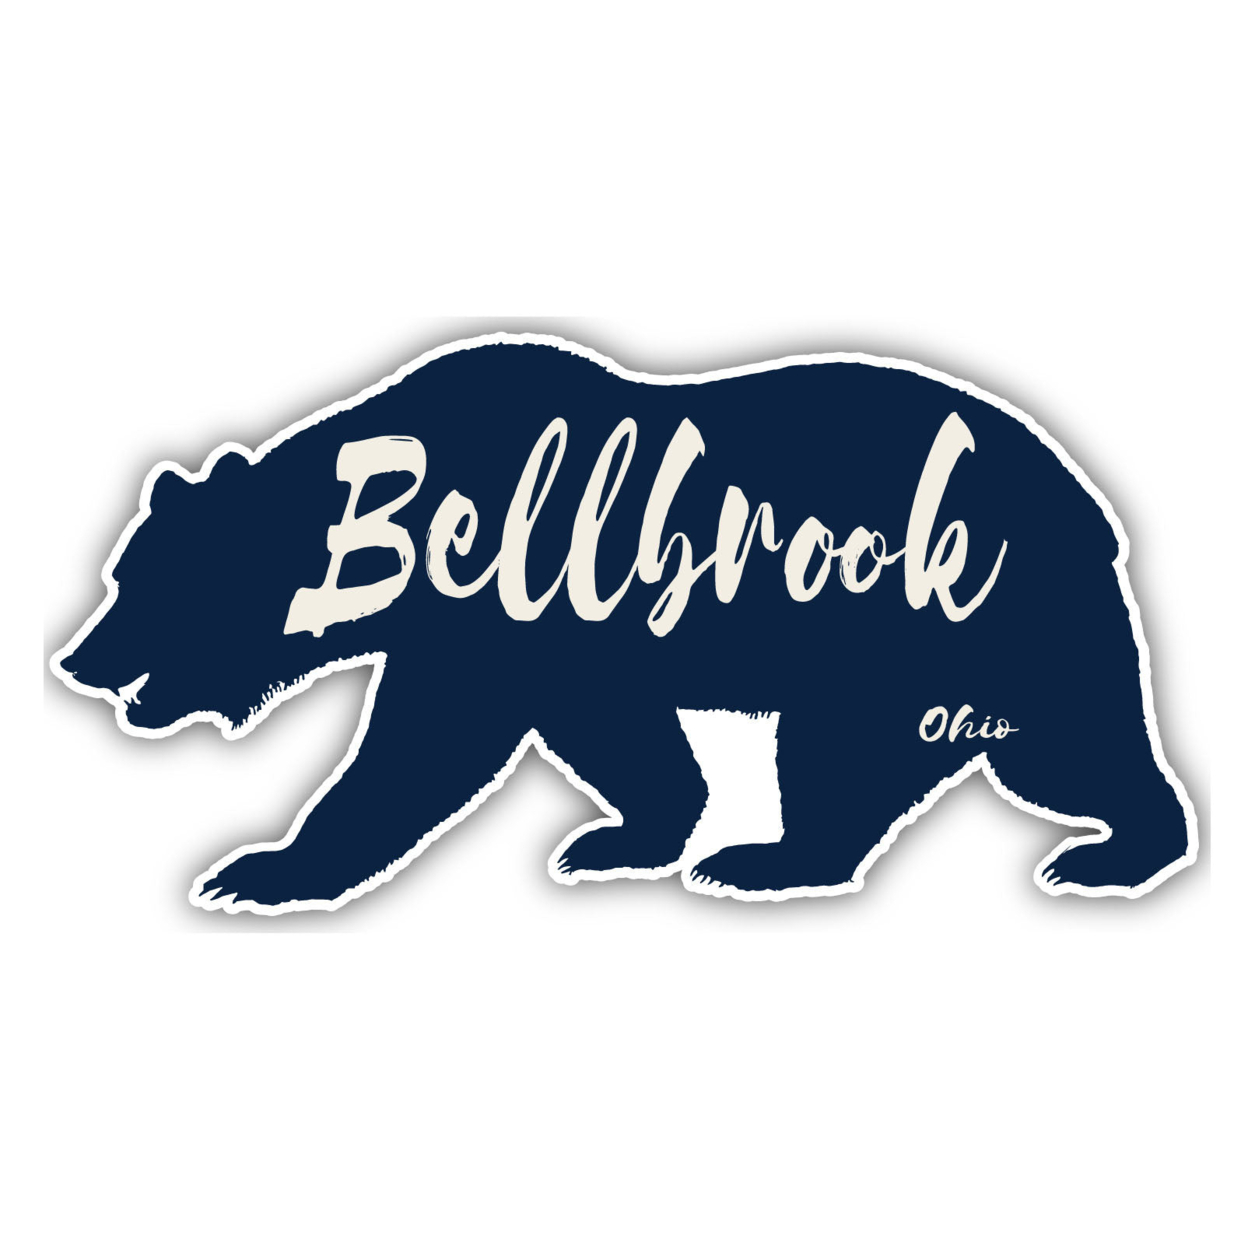 Bellbrook Ohio Souvenir Decorative Stickers (Choose Theme And Size) - 4-Pack, 12-Inch, Bear